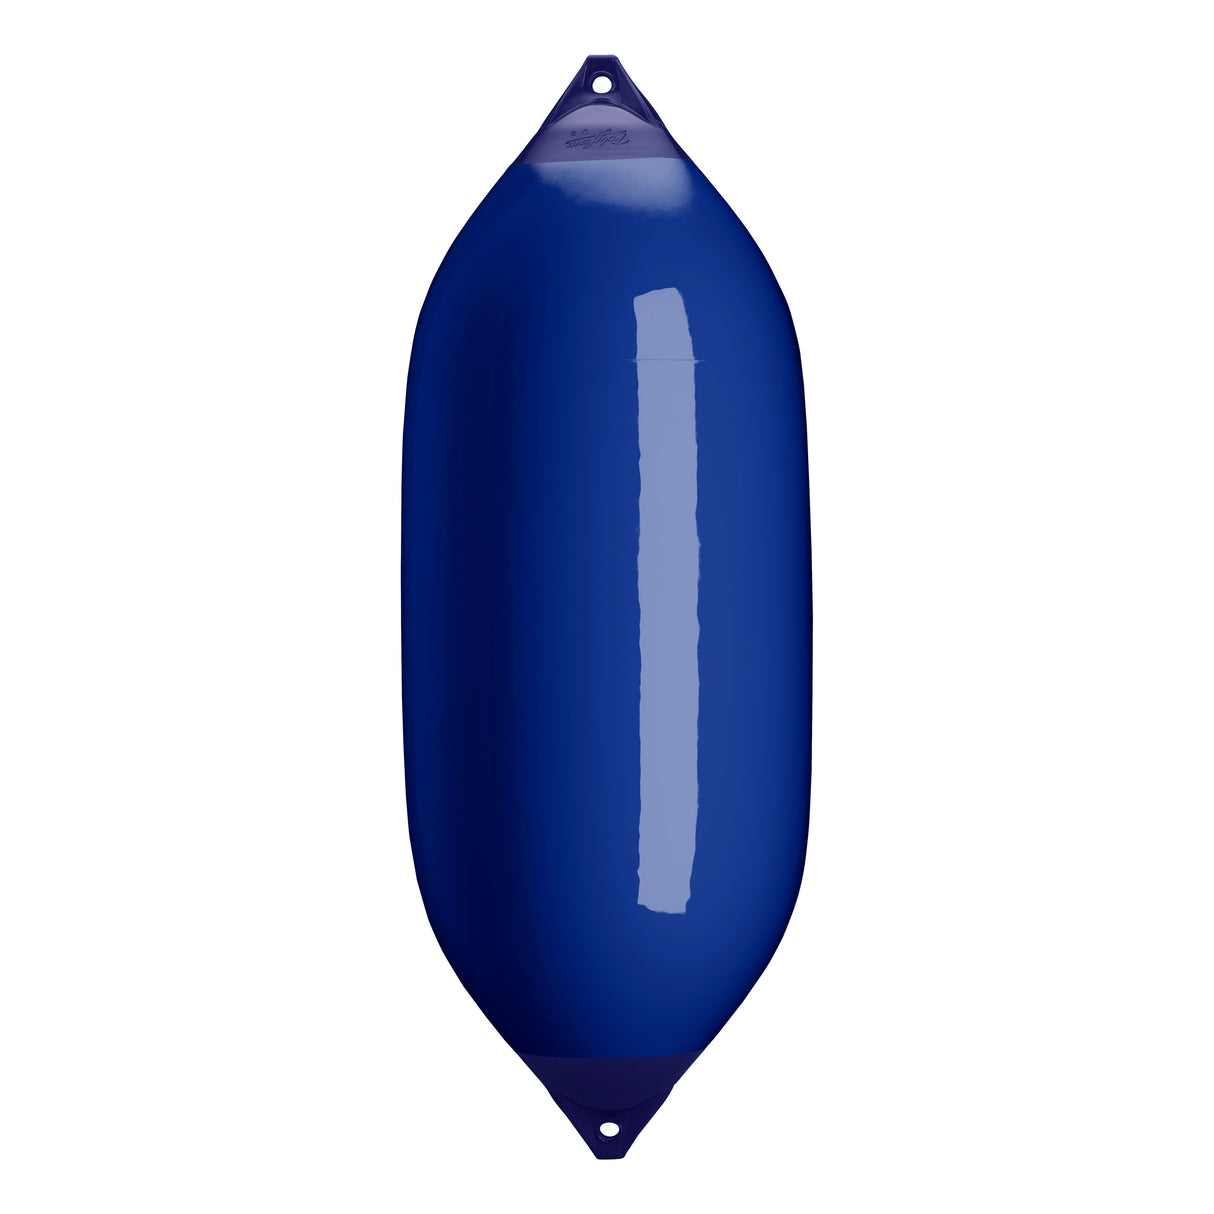 Cobalt Blue boat fender with Navy-Top, Polyform F-13 